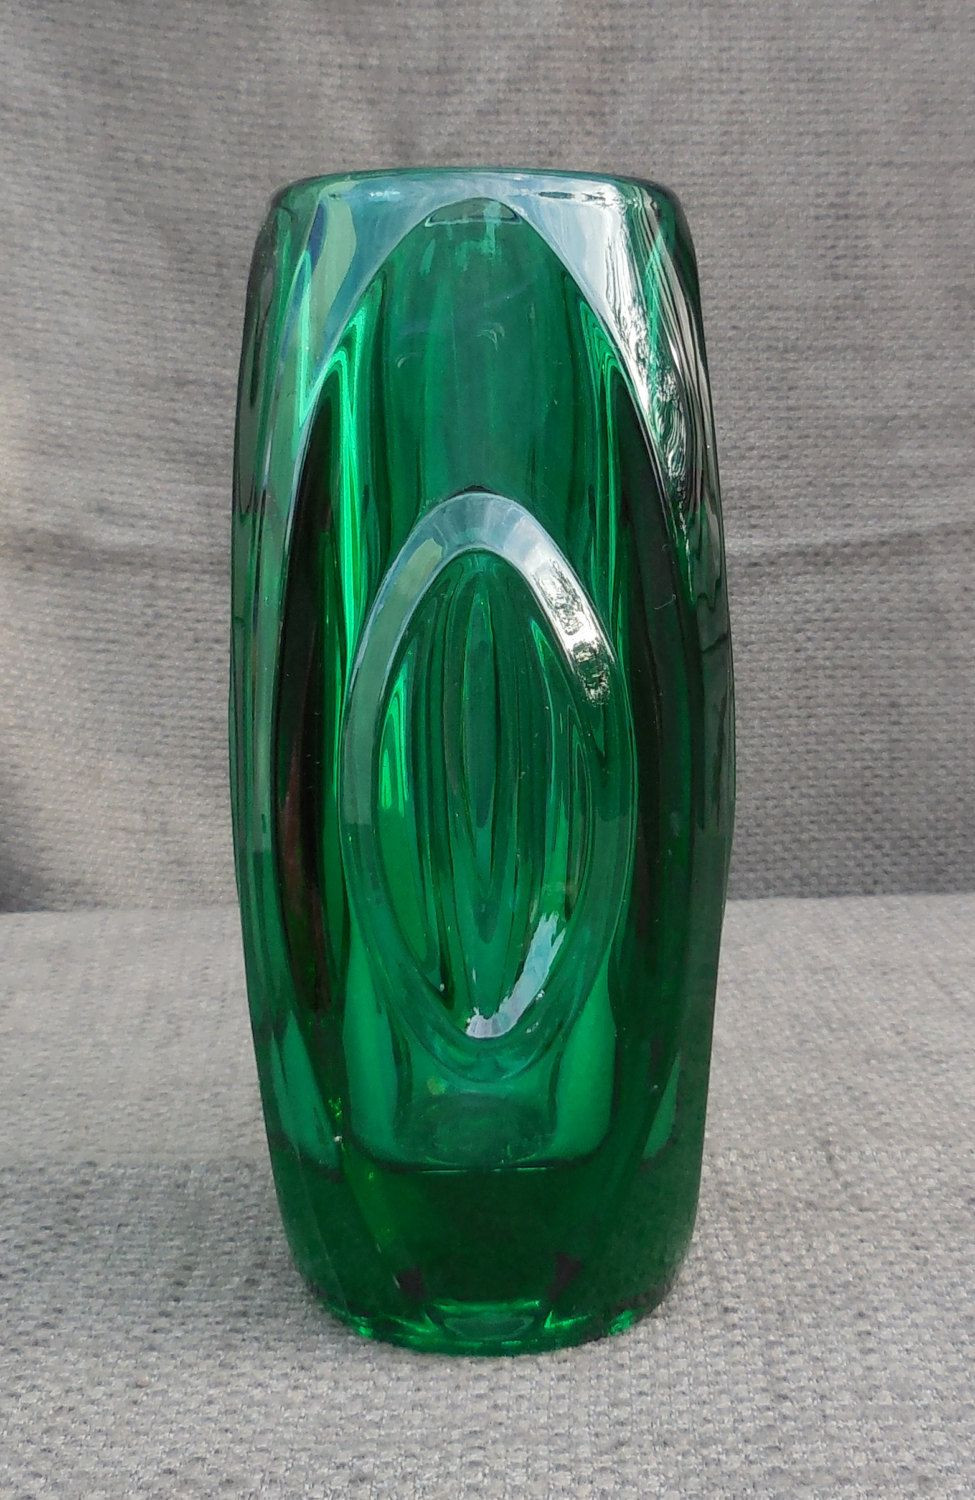 29 Nice Red Glass Vases for Sale 2024 free download red glass vases for sale of stunning 1950s vintage rosice czech lens green art glass vase by with regard to stunning 1950s vintage rosice czech lens green art glass vase by rudolph schrotter